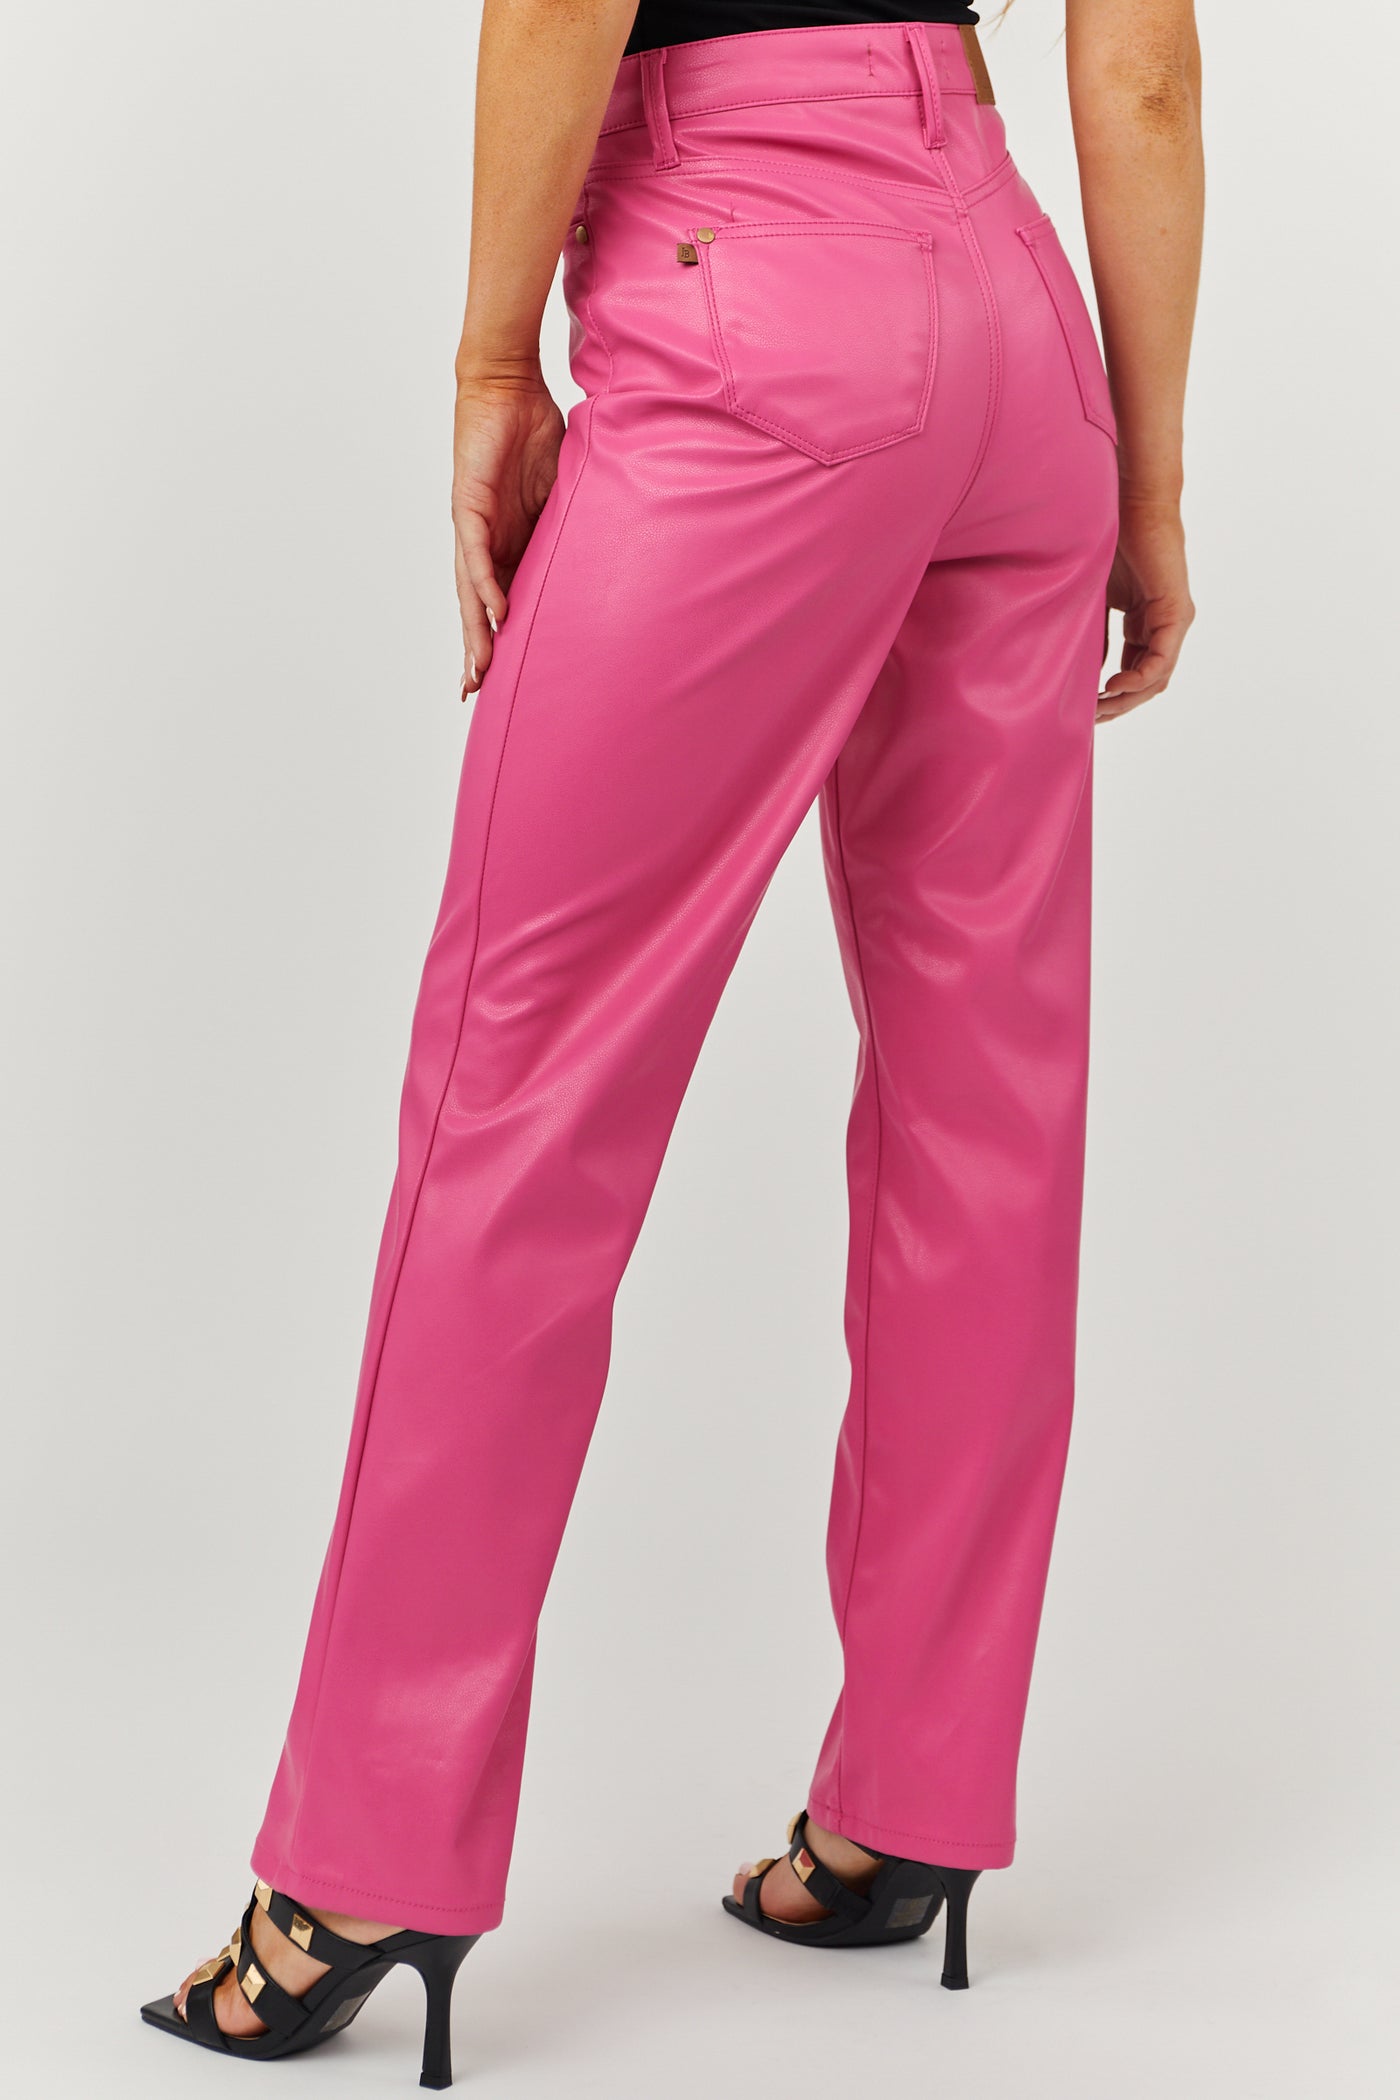 Judy Blue Magenta Faux Leather Straight Pants